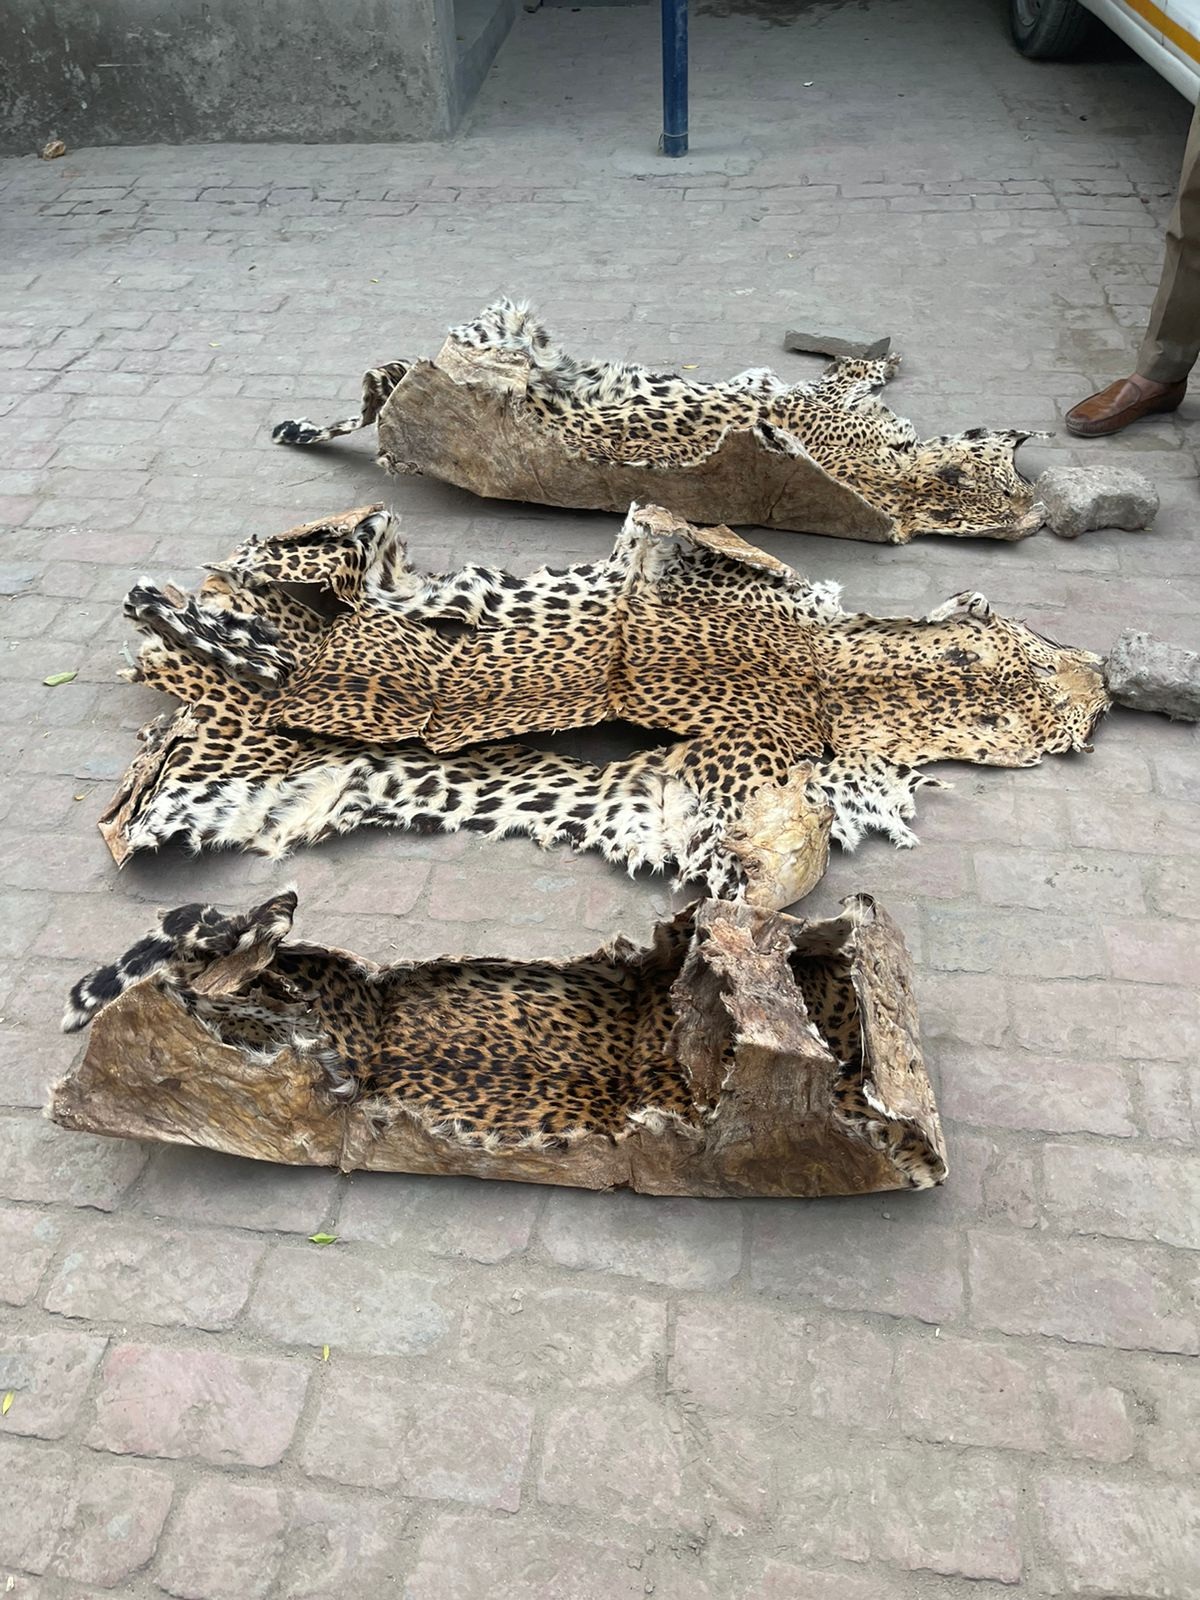 Ludhiana: 3 leopard skins recovered from house, man arrested